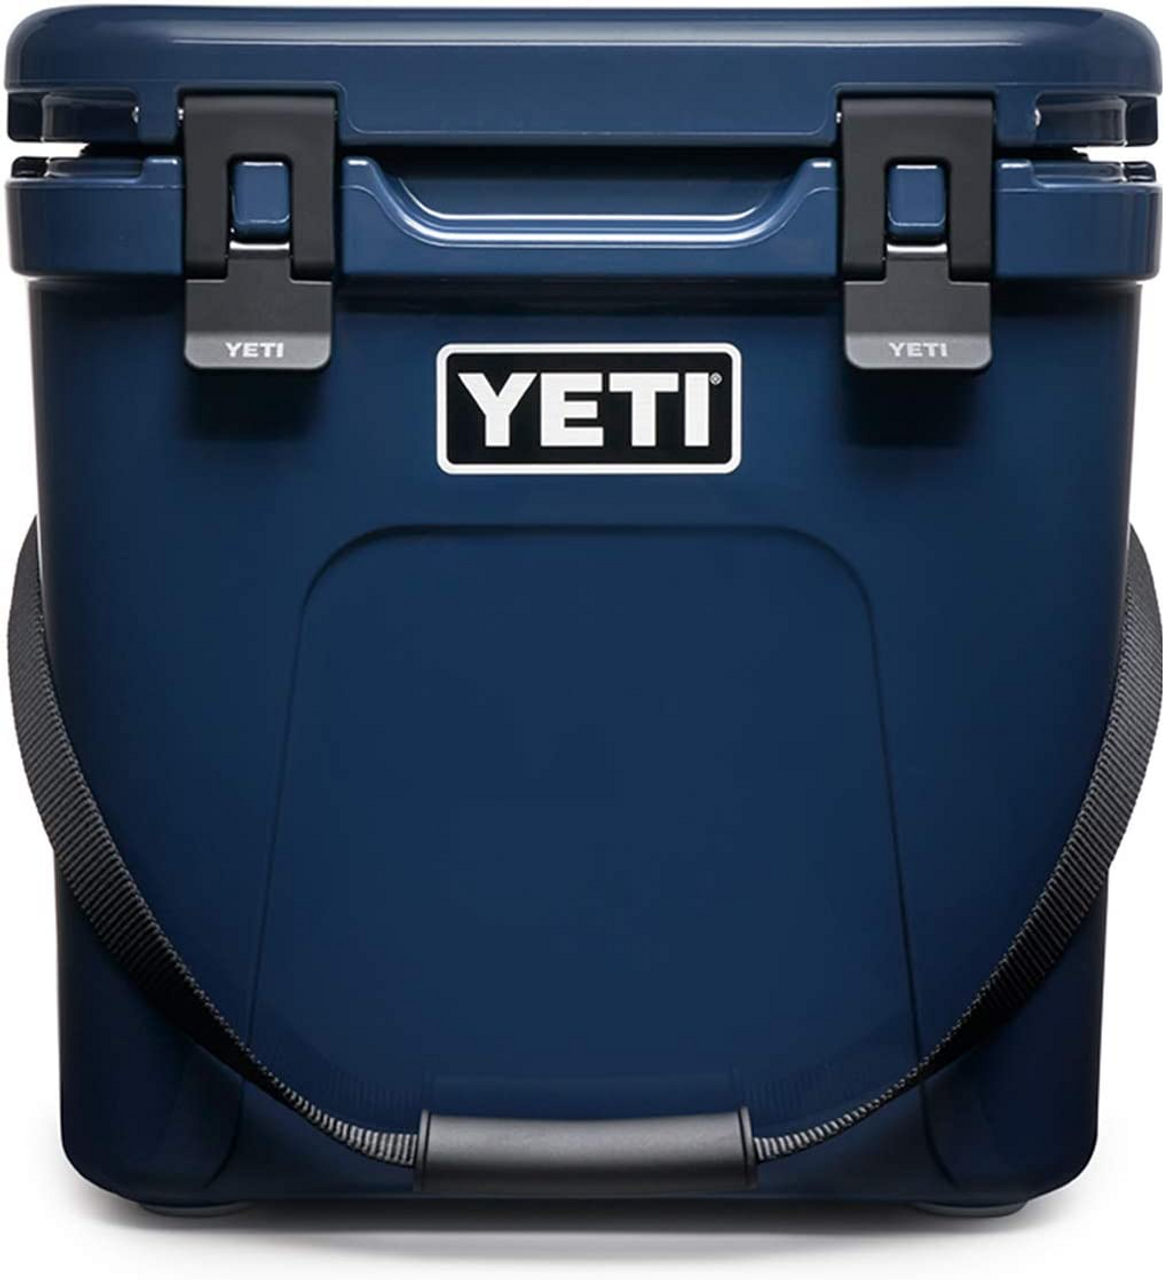 https://cdn11.bigcommerce.com/s-mkx5msl2io/images/stencil/1280x1280/products/11261/63393/Yeti-Roadie-24-Navy-10022010000__S_1__06374.1674252527.png?c=1